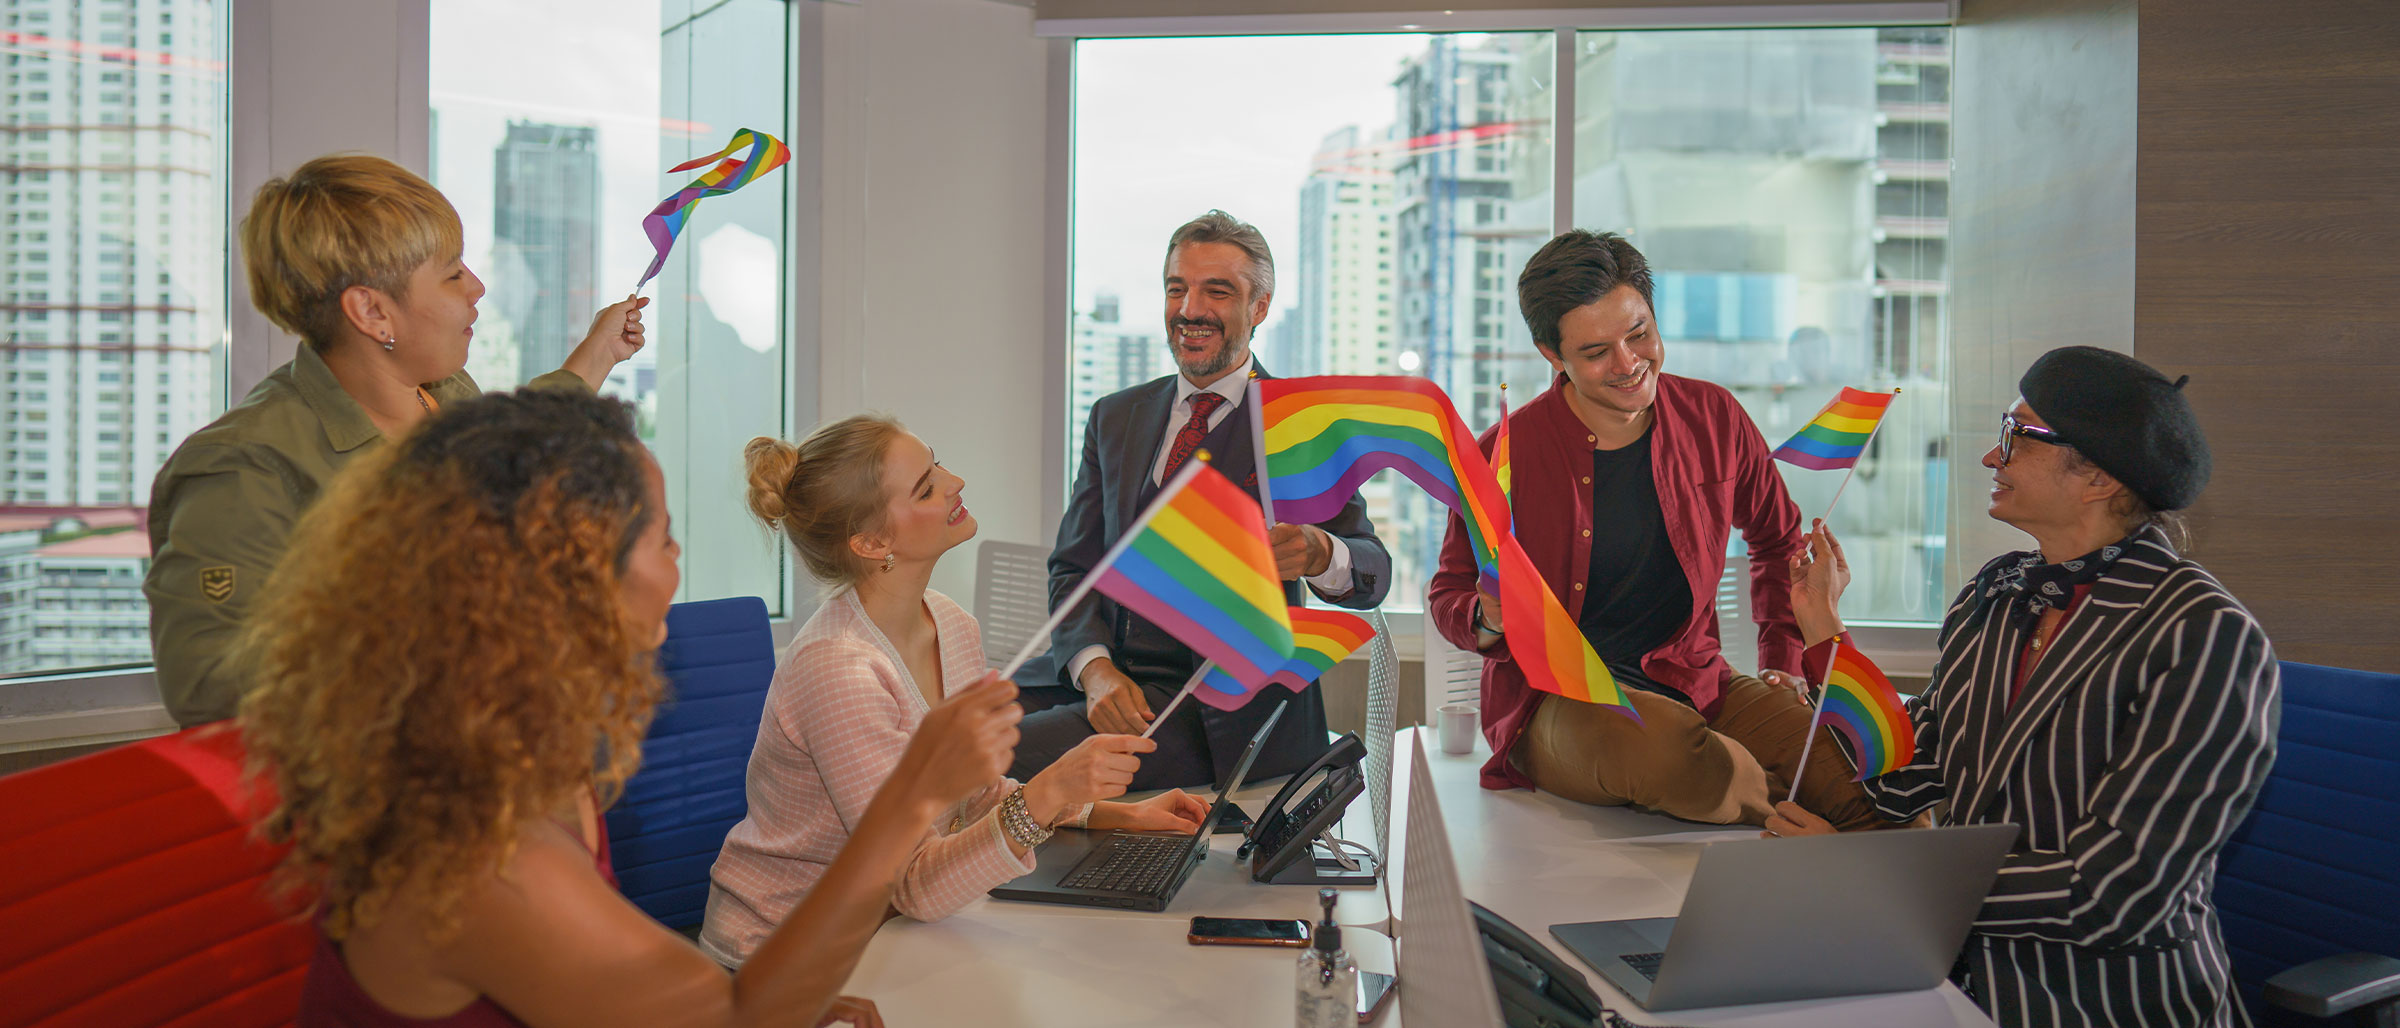 People in boardroom smiling with pride flags